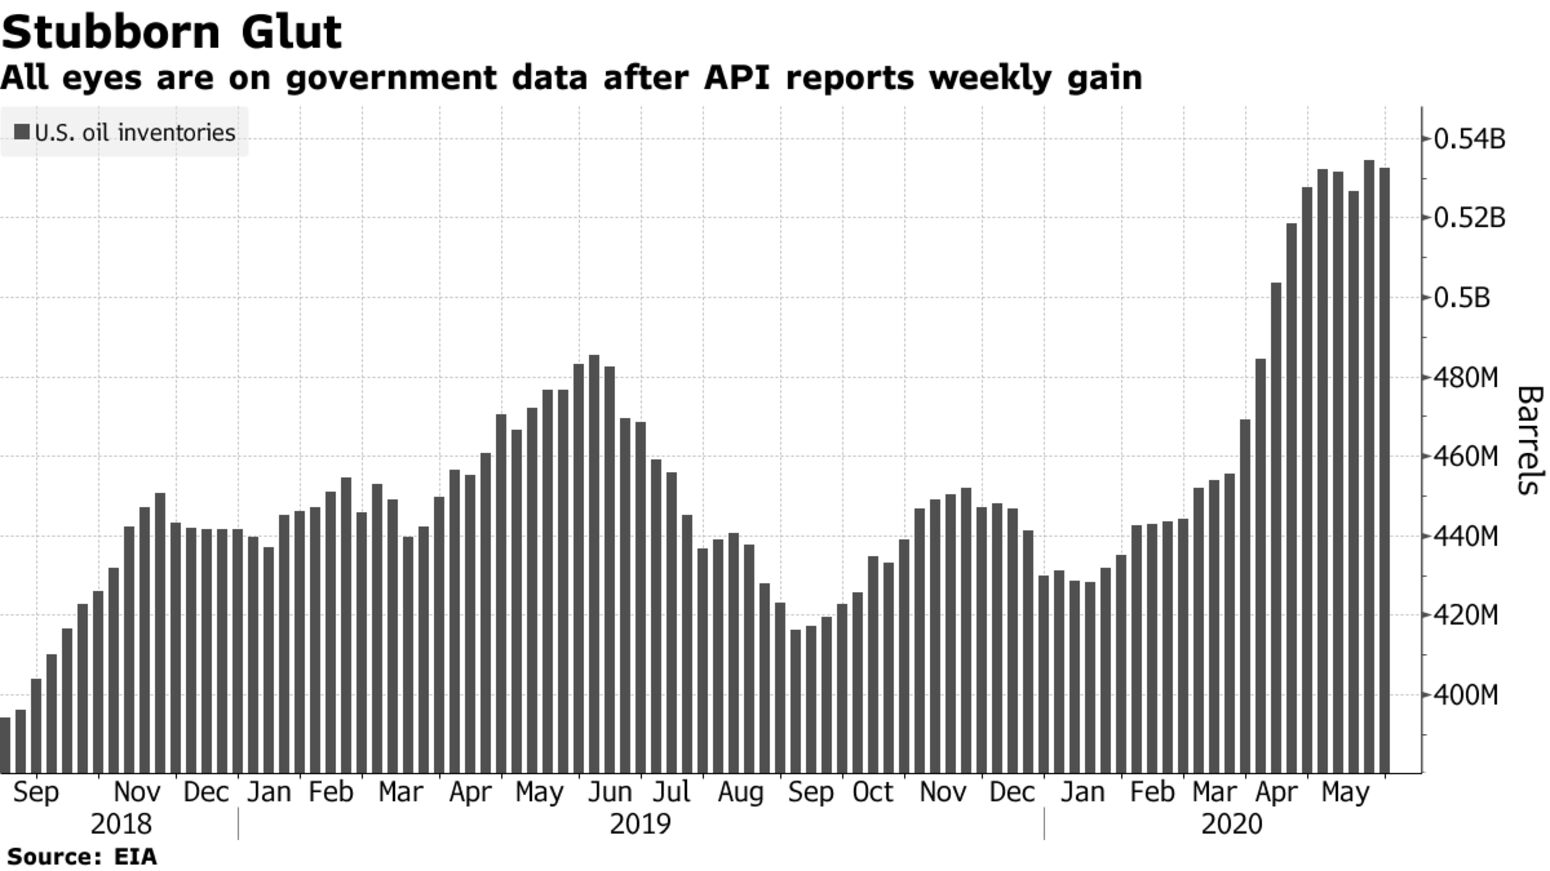 All eyes are on government data after API reports weekly gain